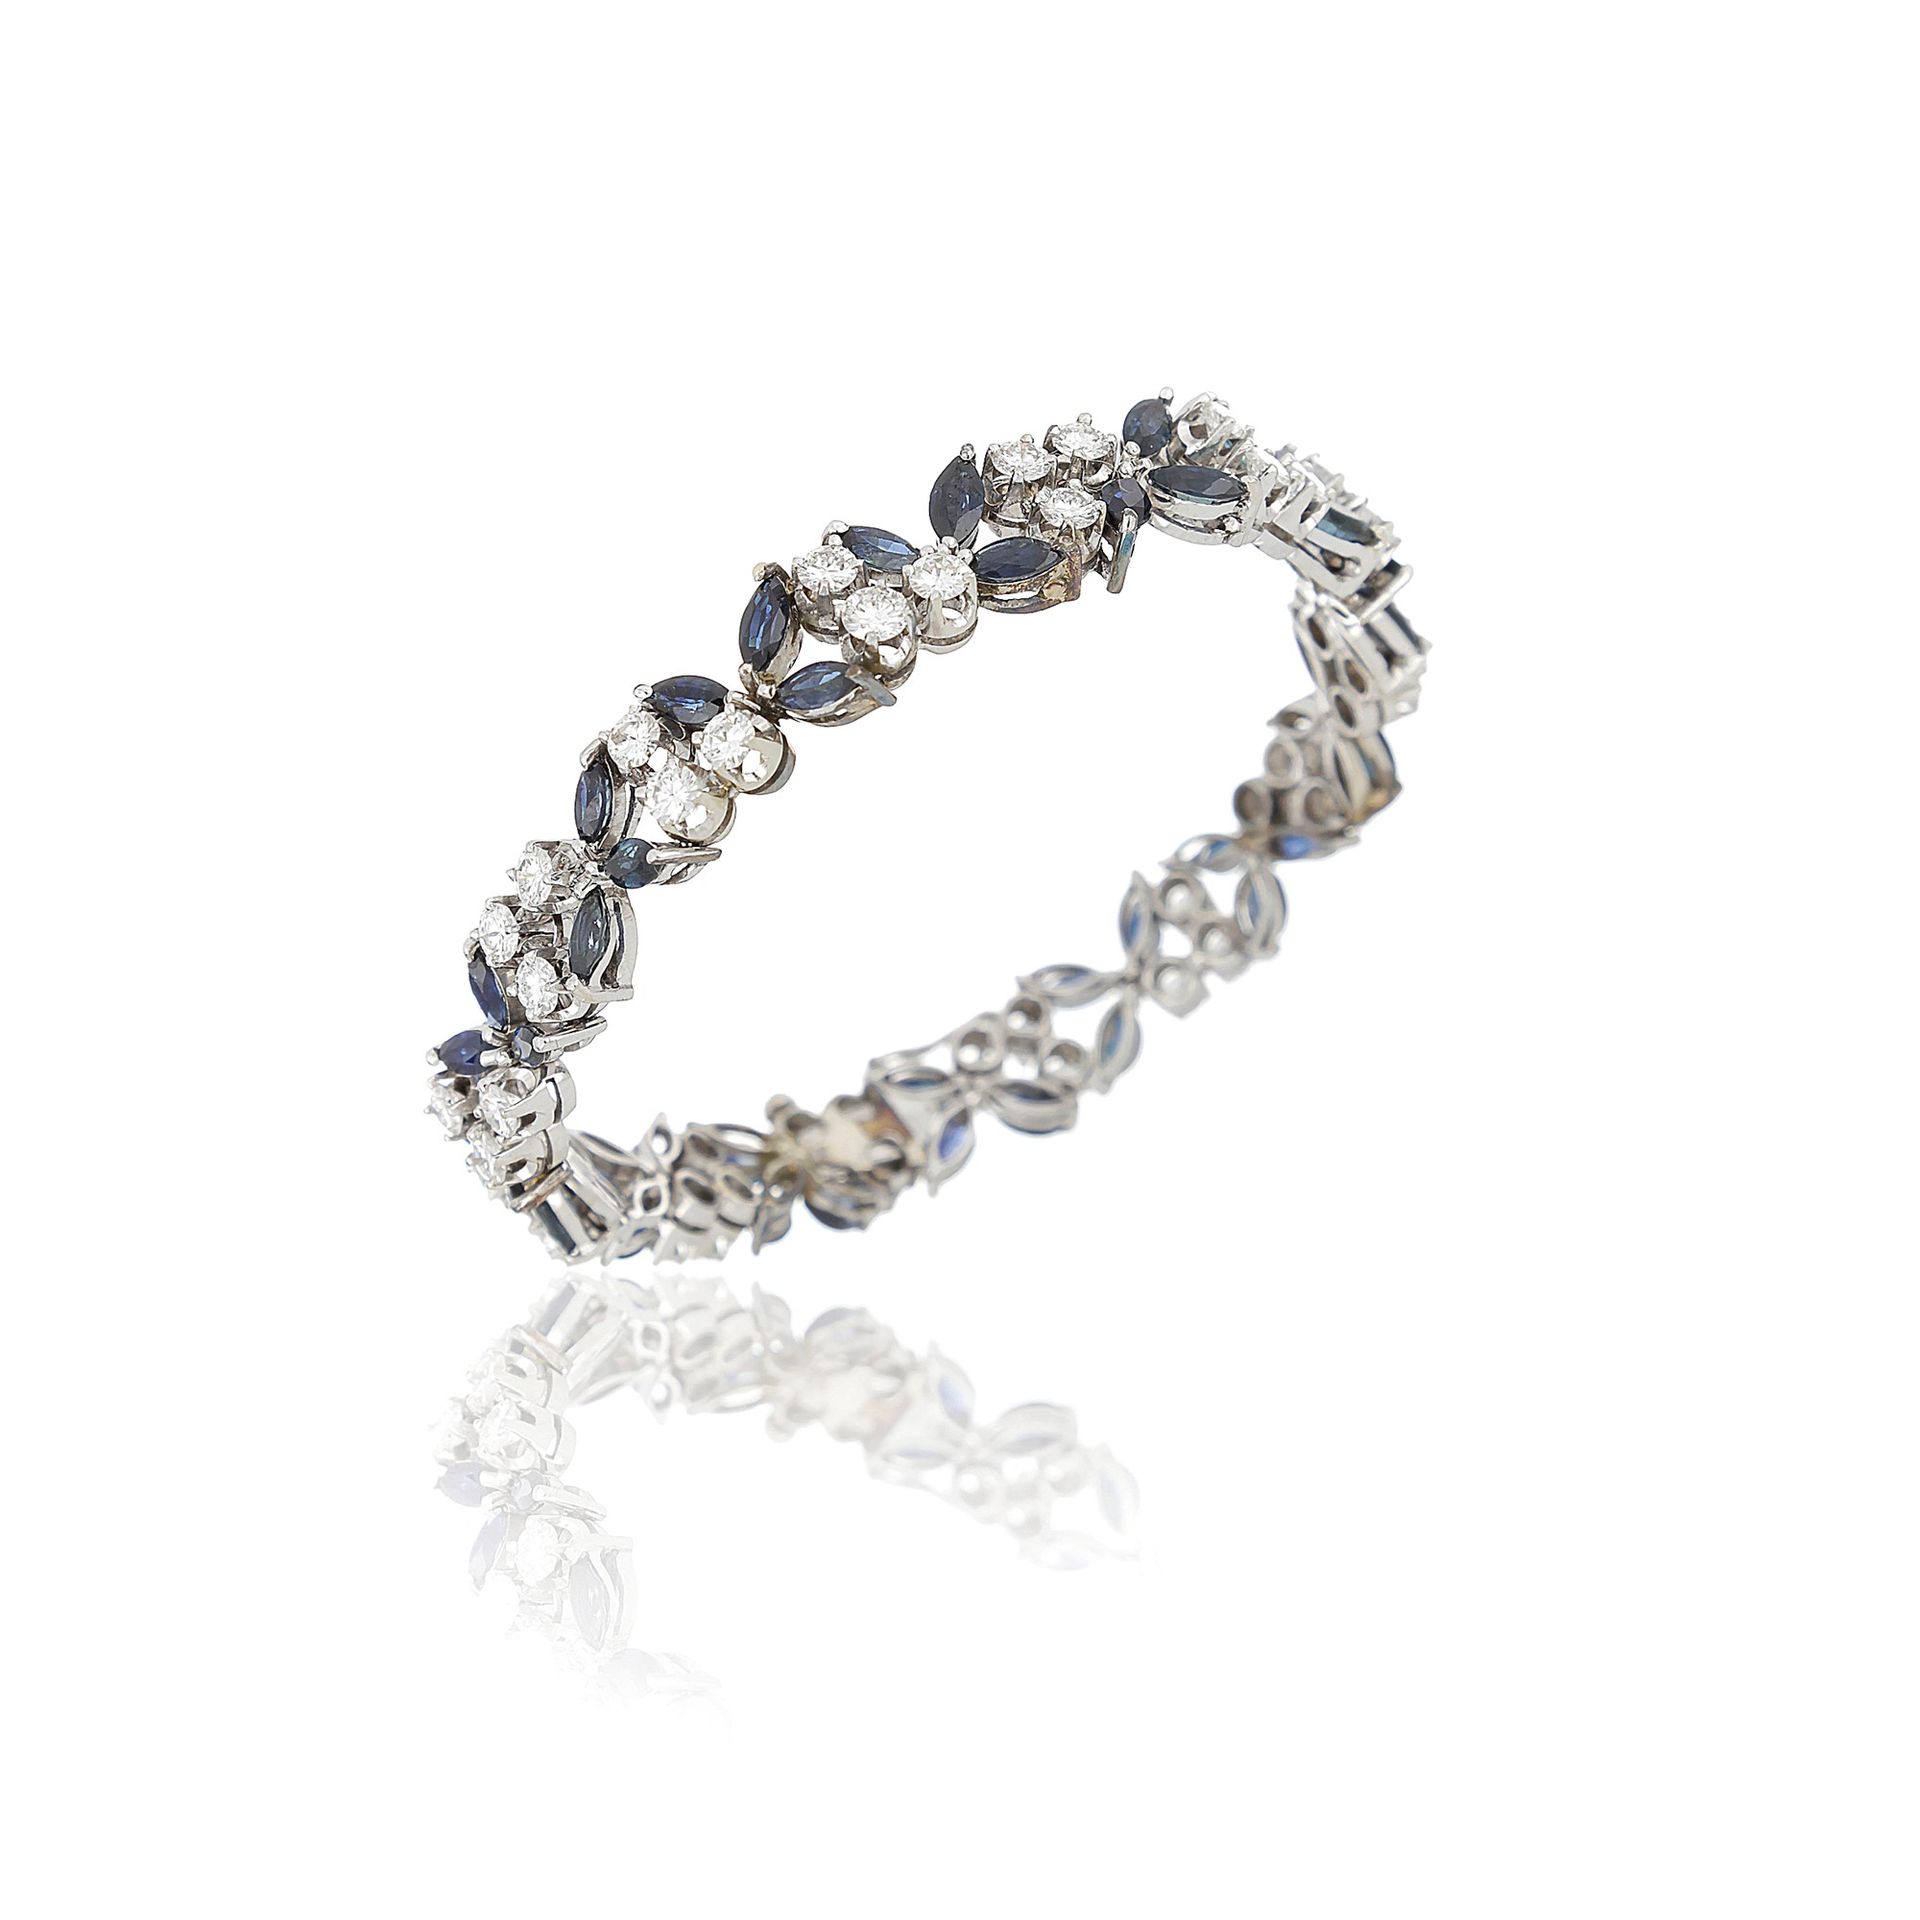 Null 18kt white gold bracelet, late 1960s-mid 1970s, with round brilliant-cut di&hellip;